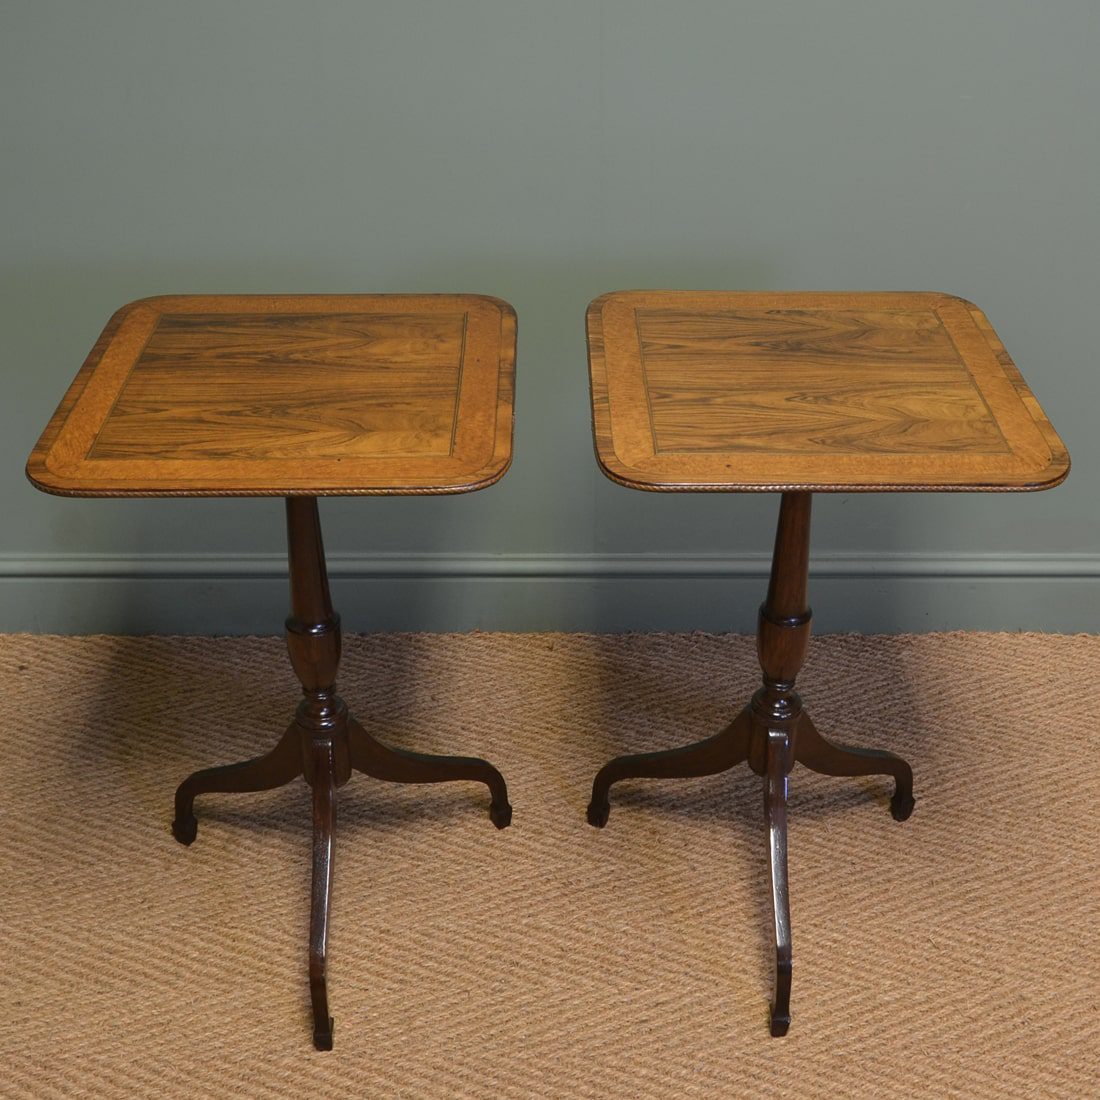 Rare Pair Of Regency Occasional Tripod Tables